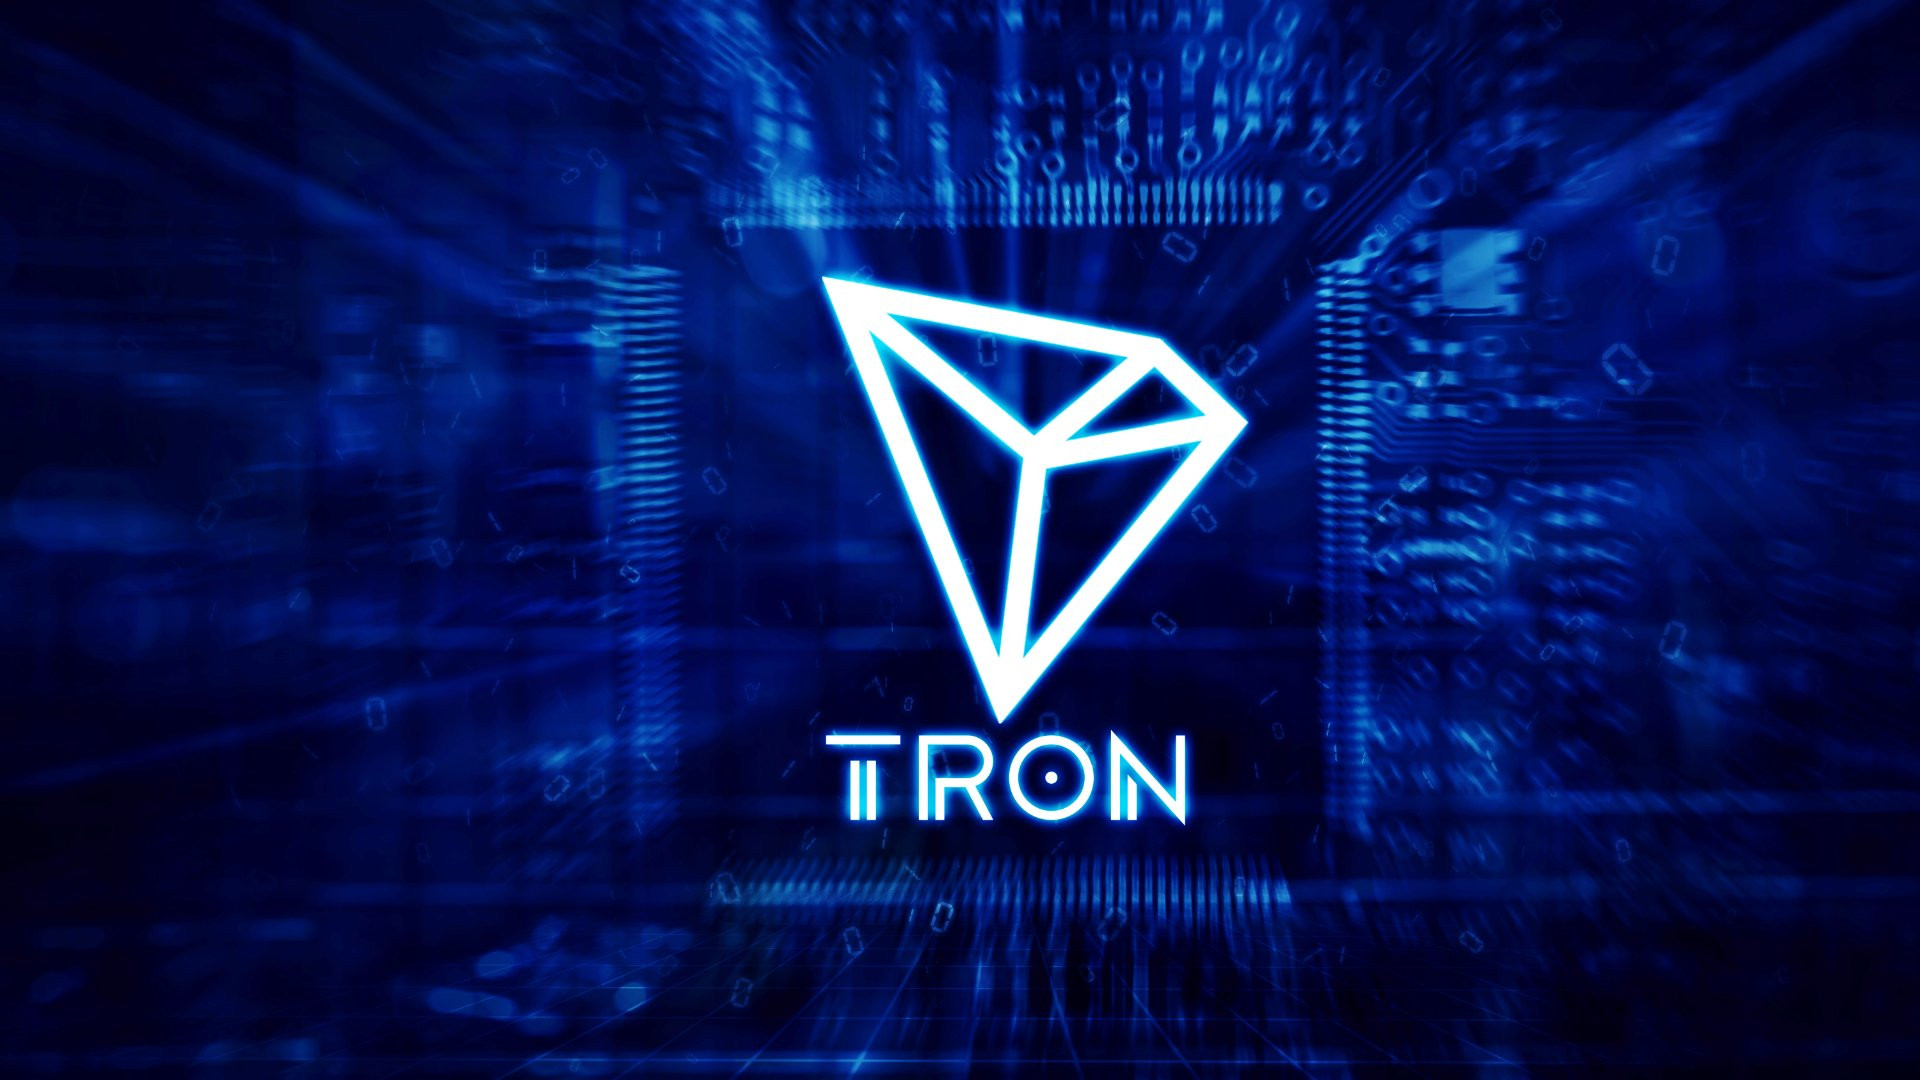 Tron TRX Ecosystem crypto coins july 2022